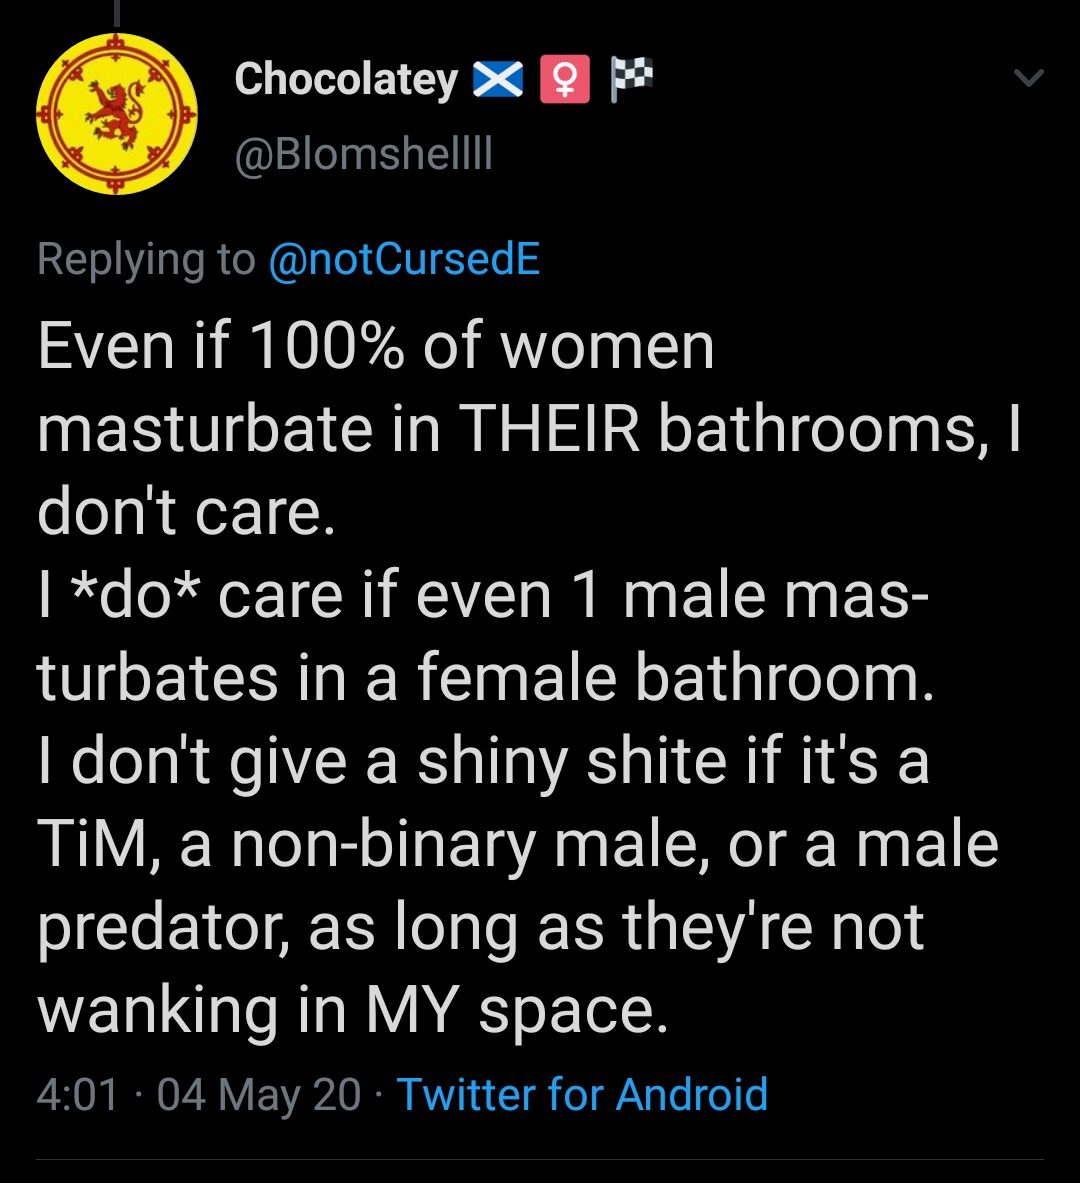 normal screen name I guess on X: As expected, its not about masturbation.  Its about transphobia. t.coAOnsRt2zSE  X